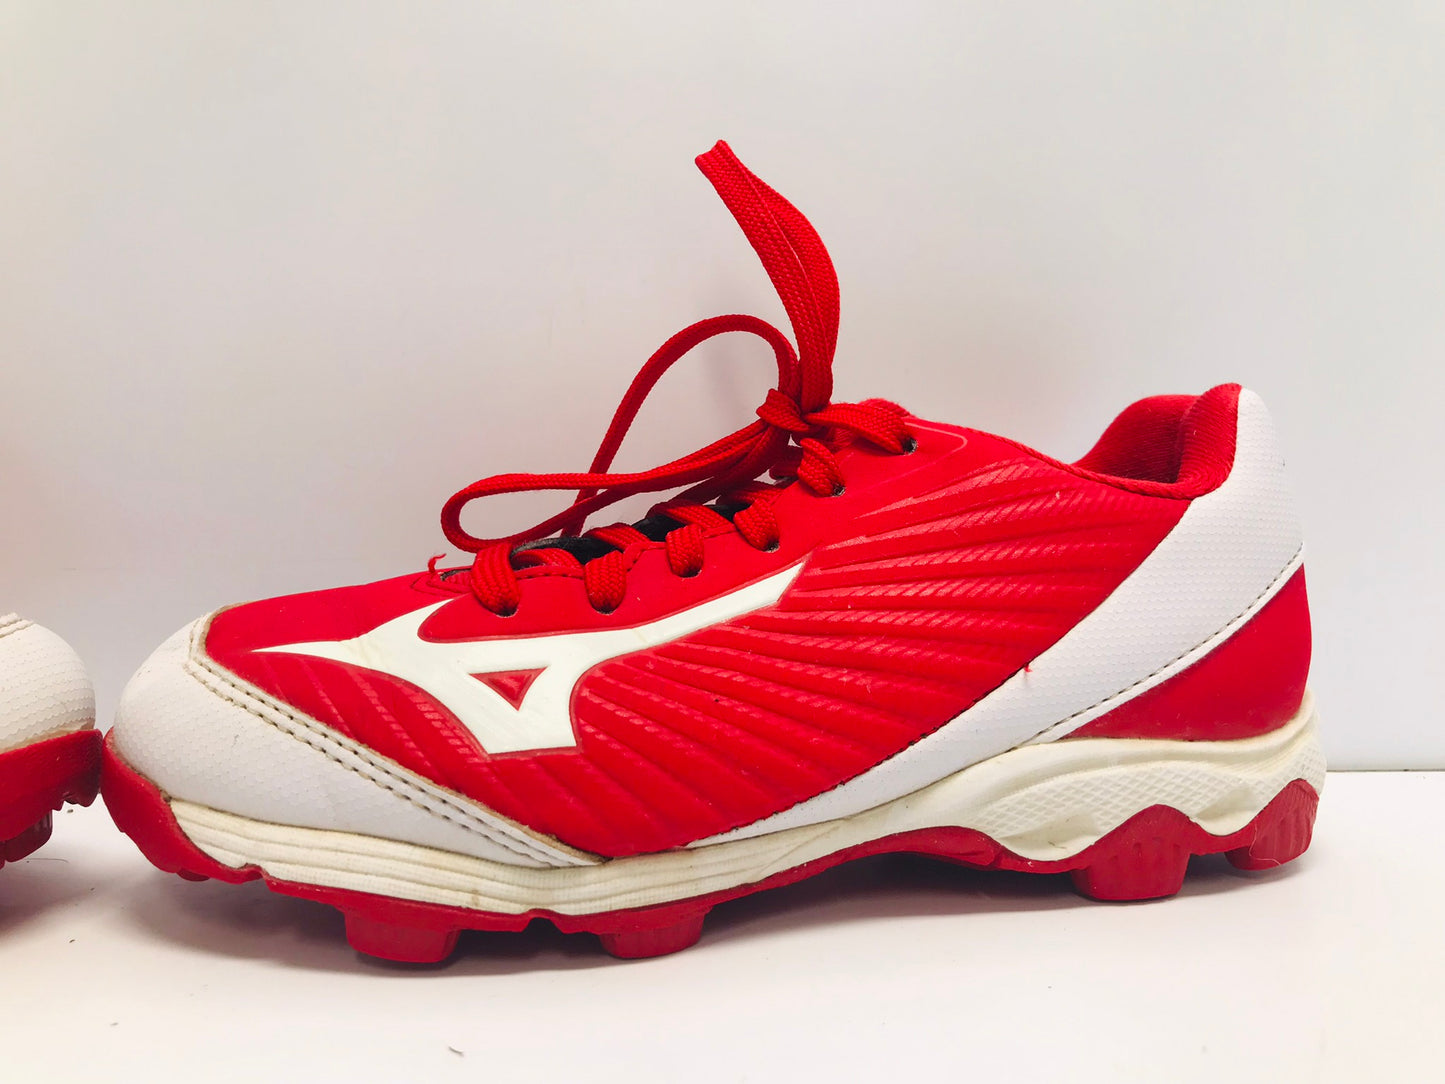 Baseball Shoes Cleats Child Size 1 Red White Excellent